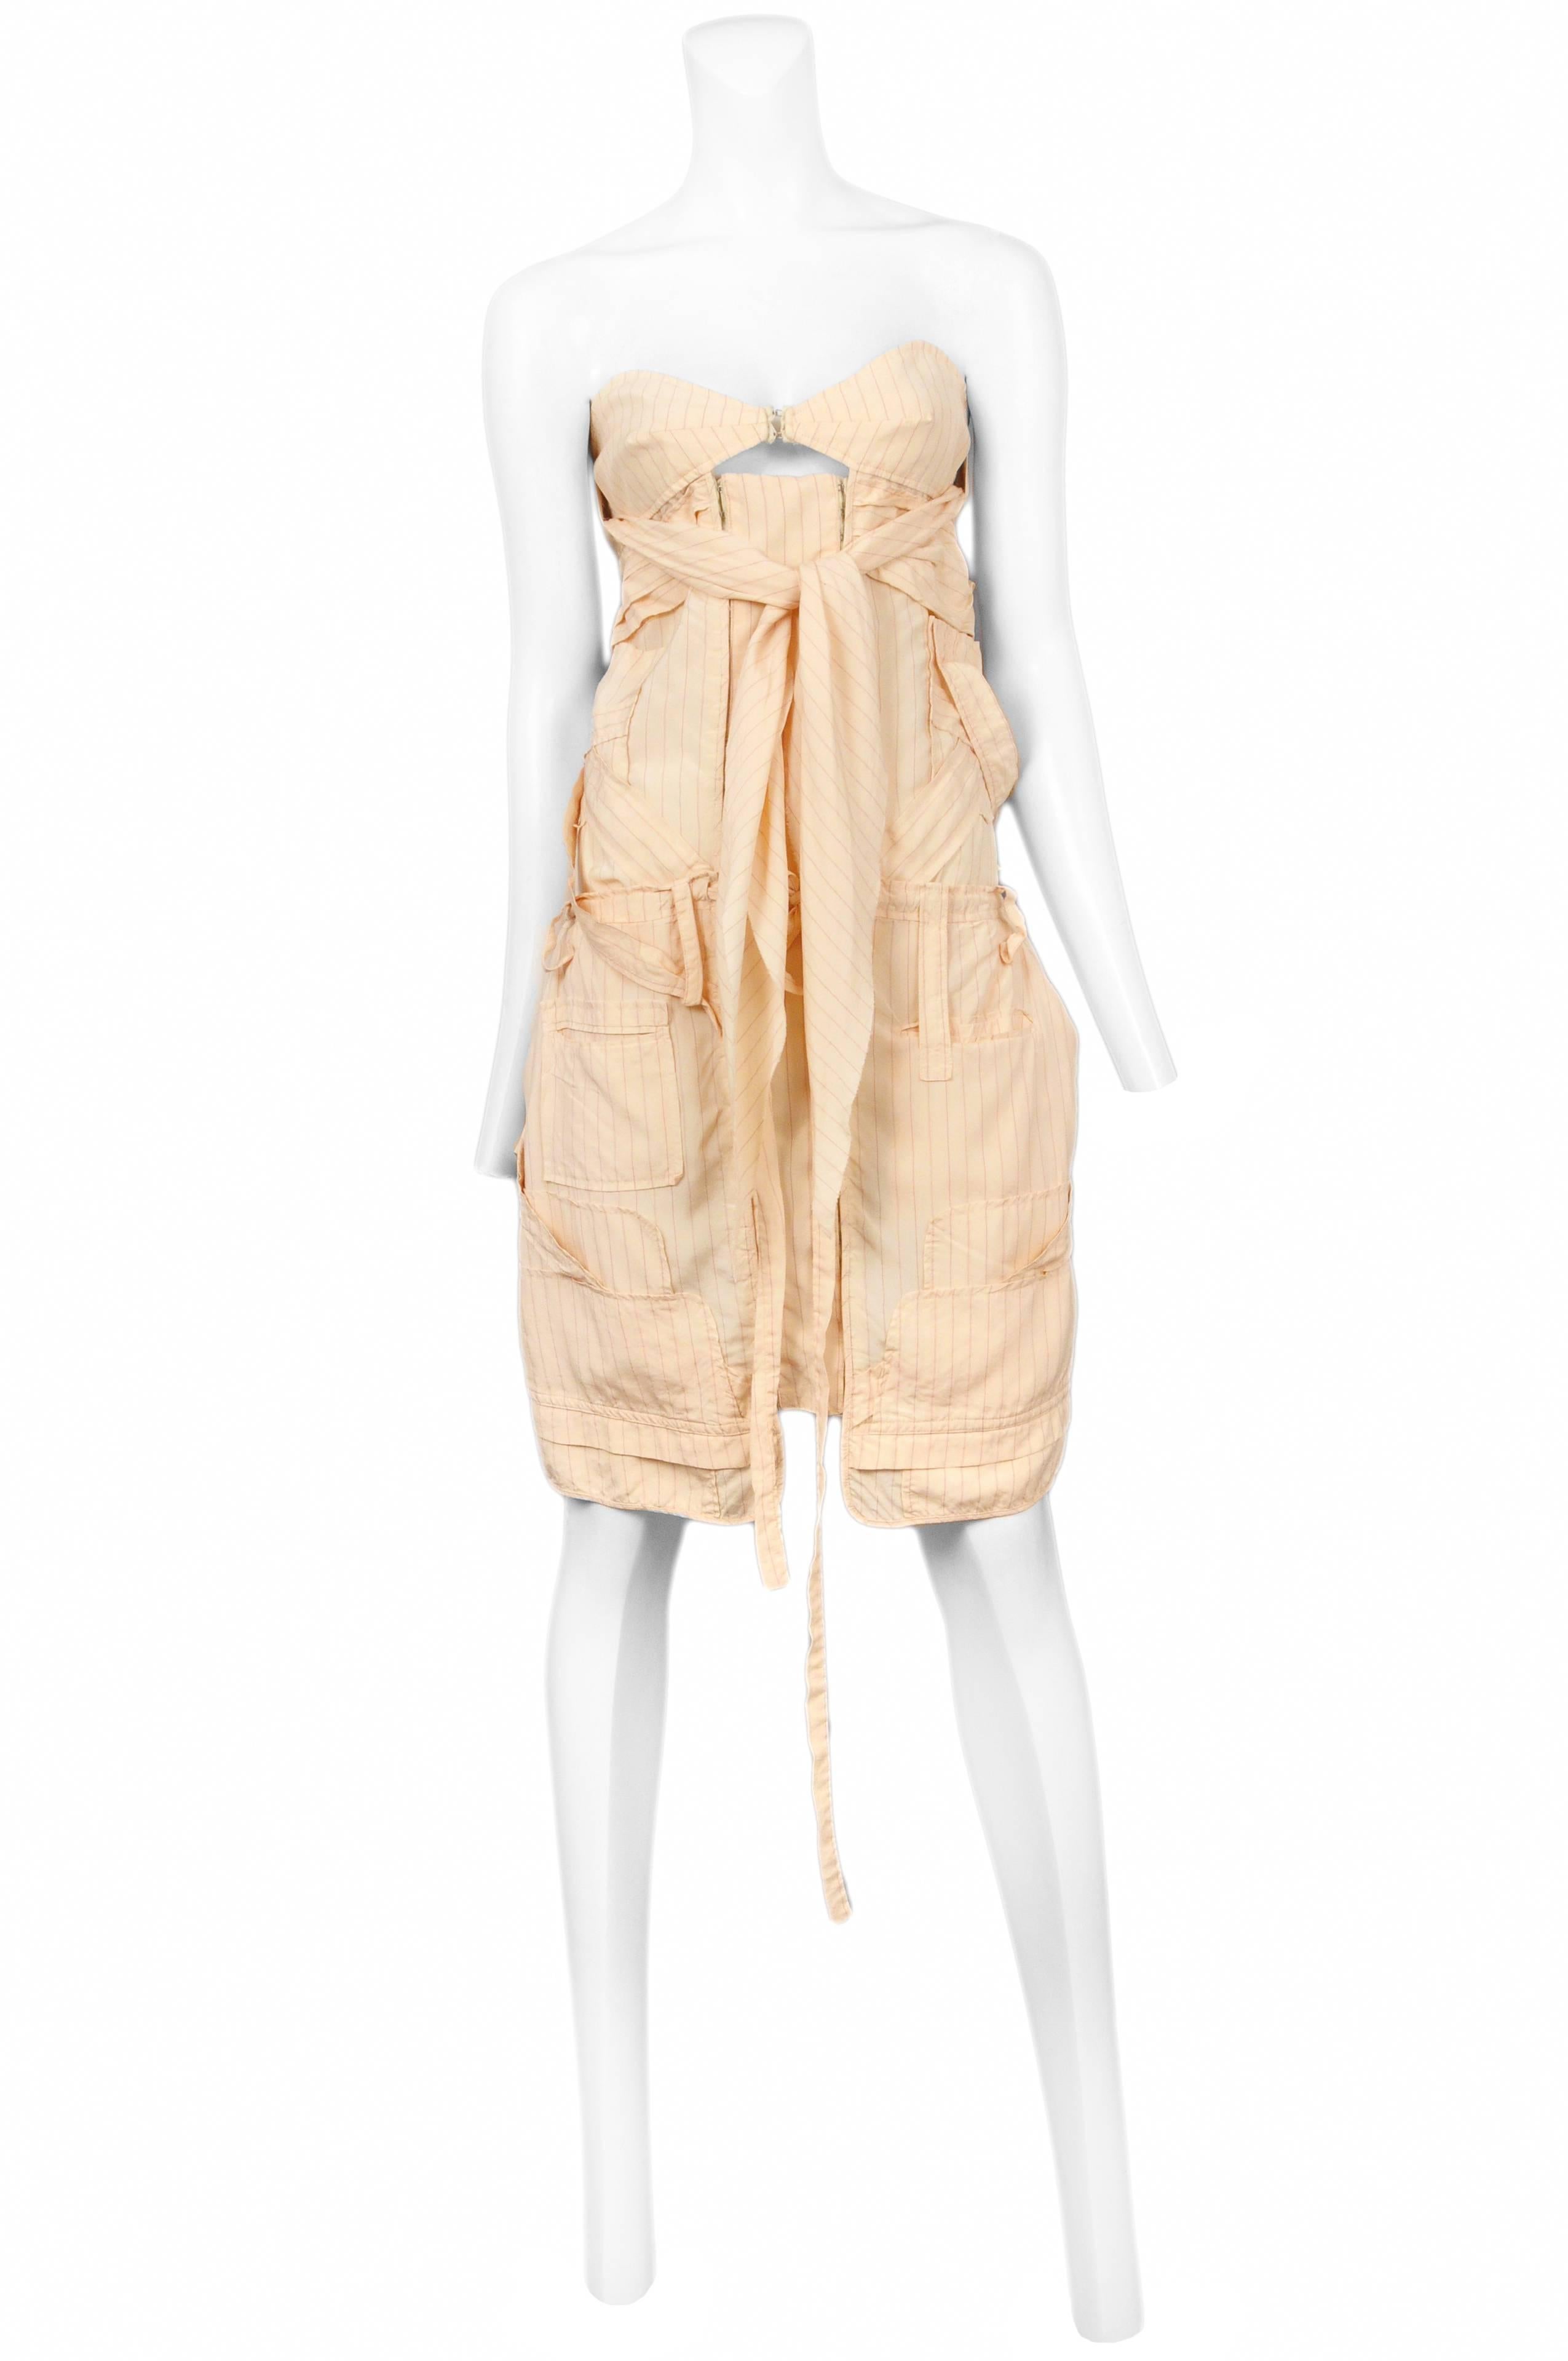 Vintage Nicolas Ghesquière for Balenciaga butter yellow pin stripe knee length dress featuring a strapless bra at the chest that anchors the lose fitting double zipper front dress, abstract pockets throughout and sashes below the bust and at the